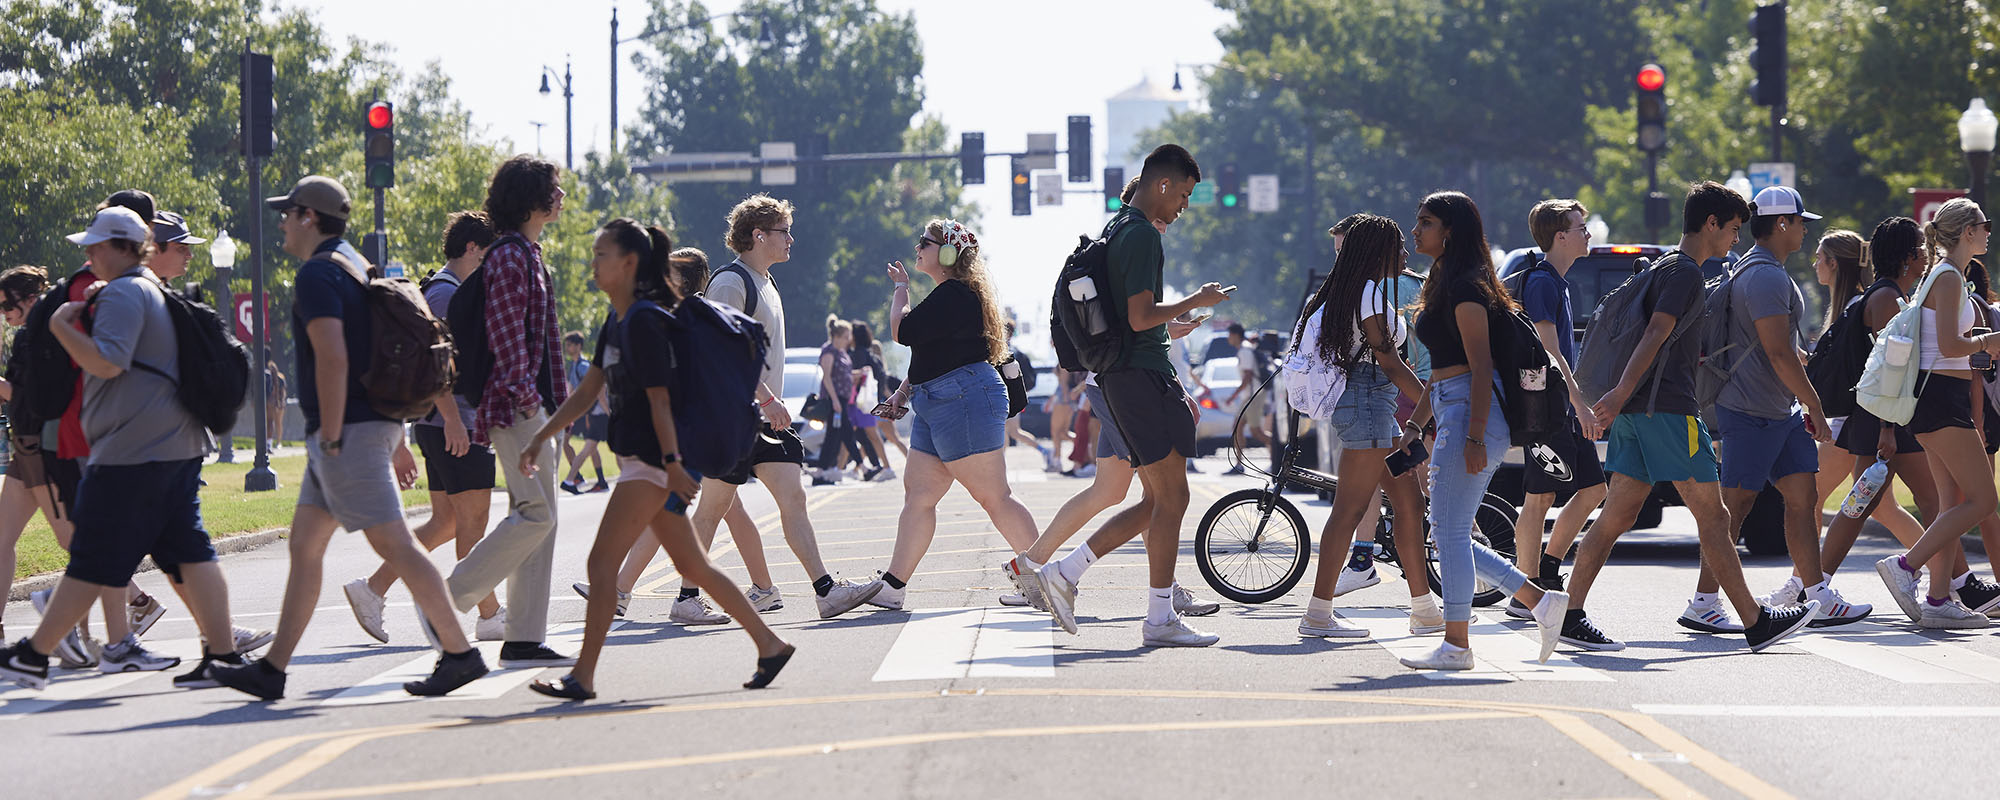 students on campus crossing the street between classes.